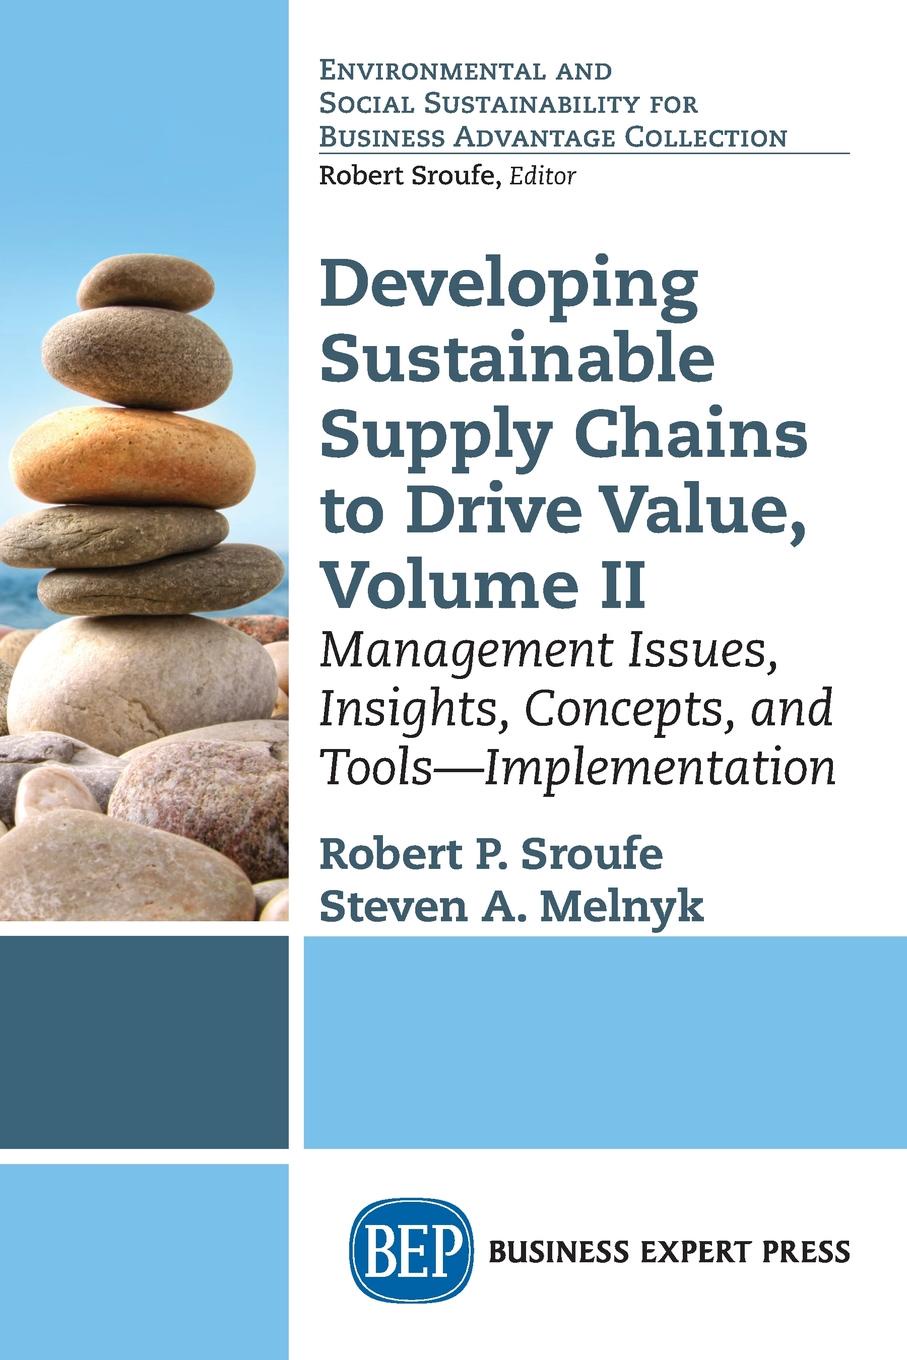 Developing Sustainable Supply Chains to Drive Value, Volume II. Management Issues, Insights, Concepts, and Tools-Implementation